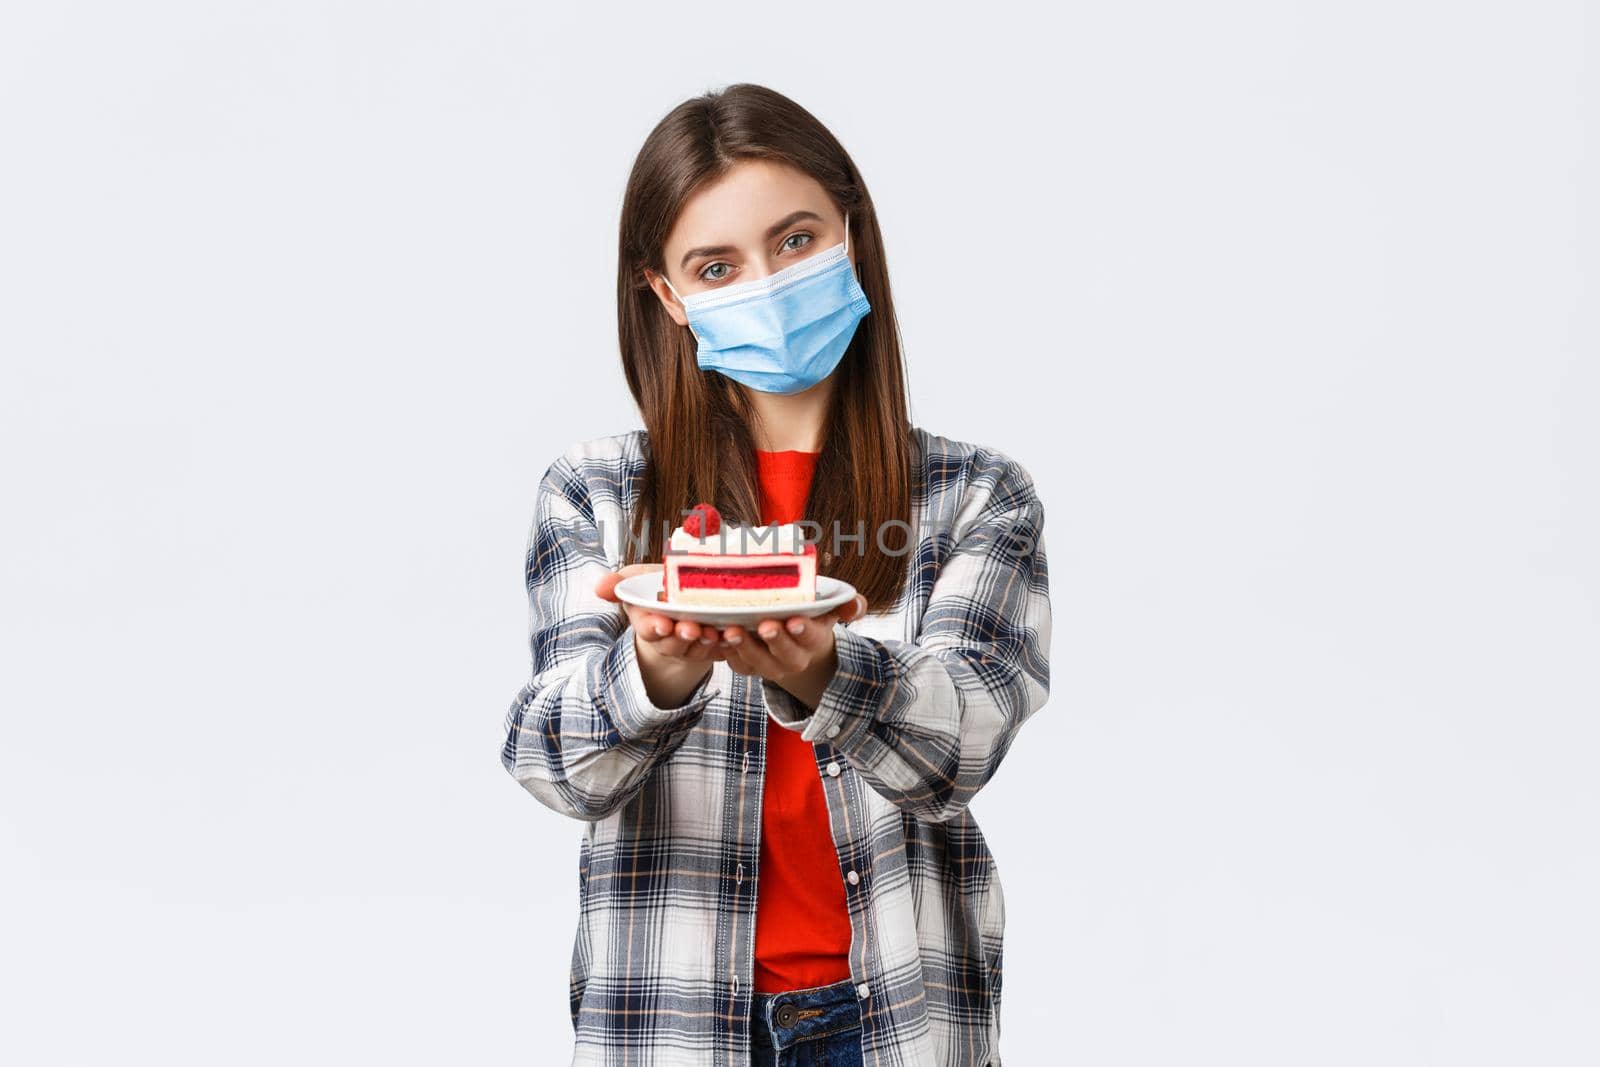 Coronavirus outbreak, lifestyle during social distancing and holidays celebration concept. Tender caring girlfriend made homemade cake, giving it to you, wear medical mask and smiling.